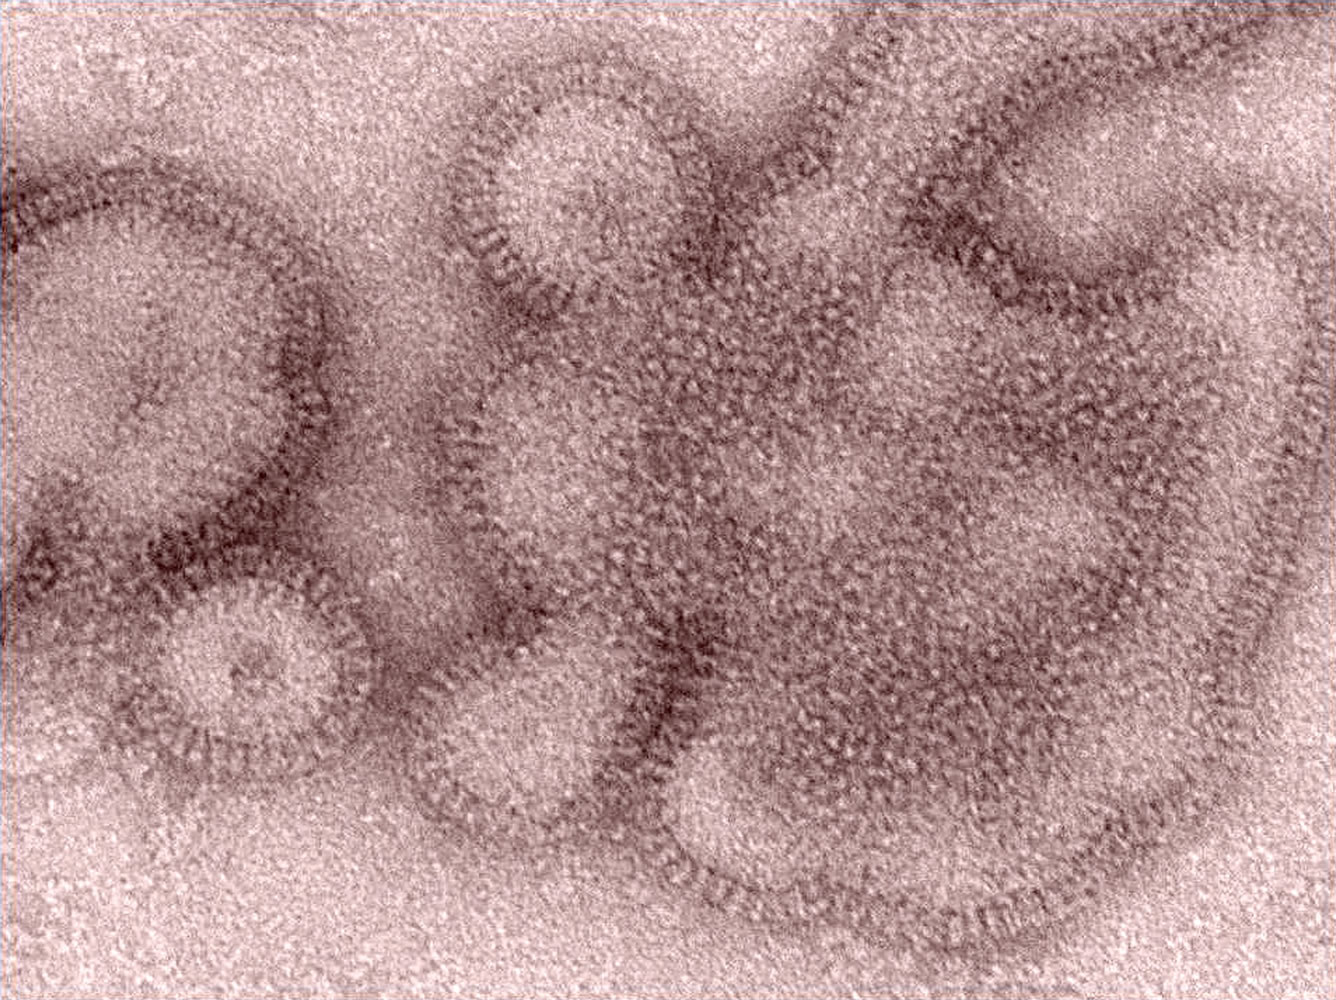 This 2011 image provided by the Centers for Disease Control and Prevention shows an H3N2 influenza virus _ the same type of flu that's responsible for most flu illnesses this winter.